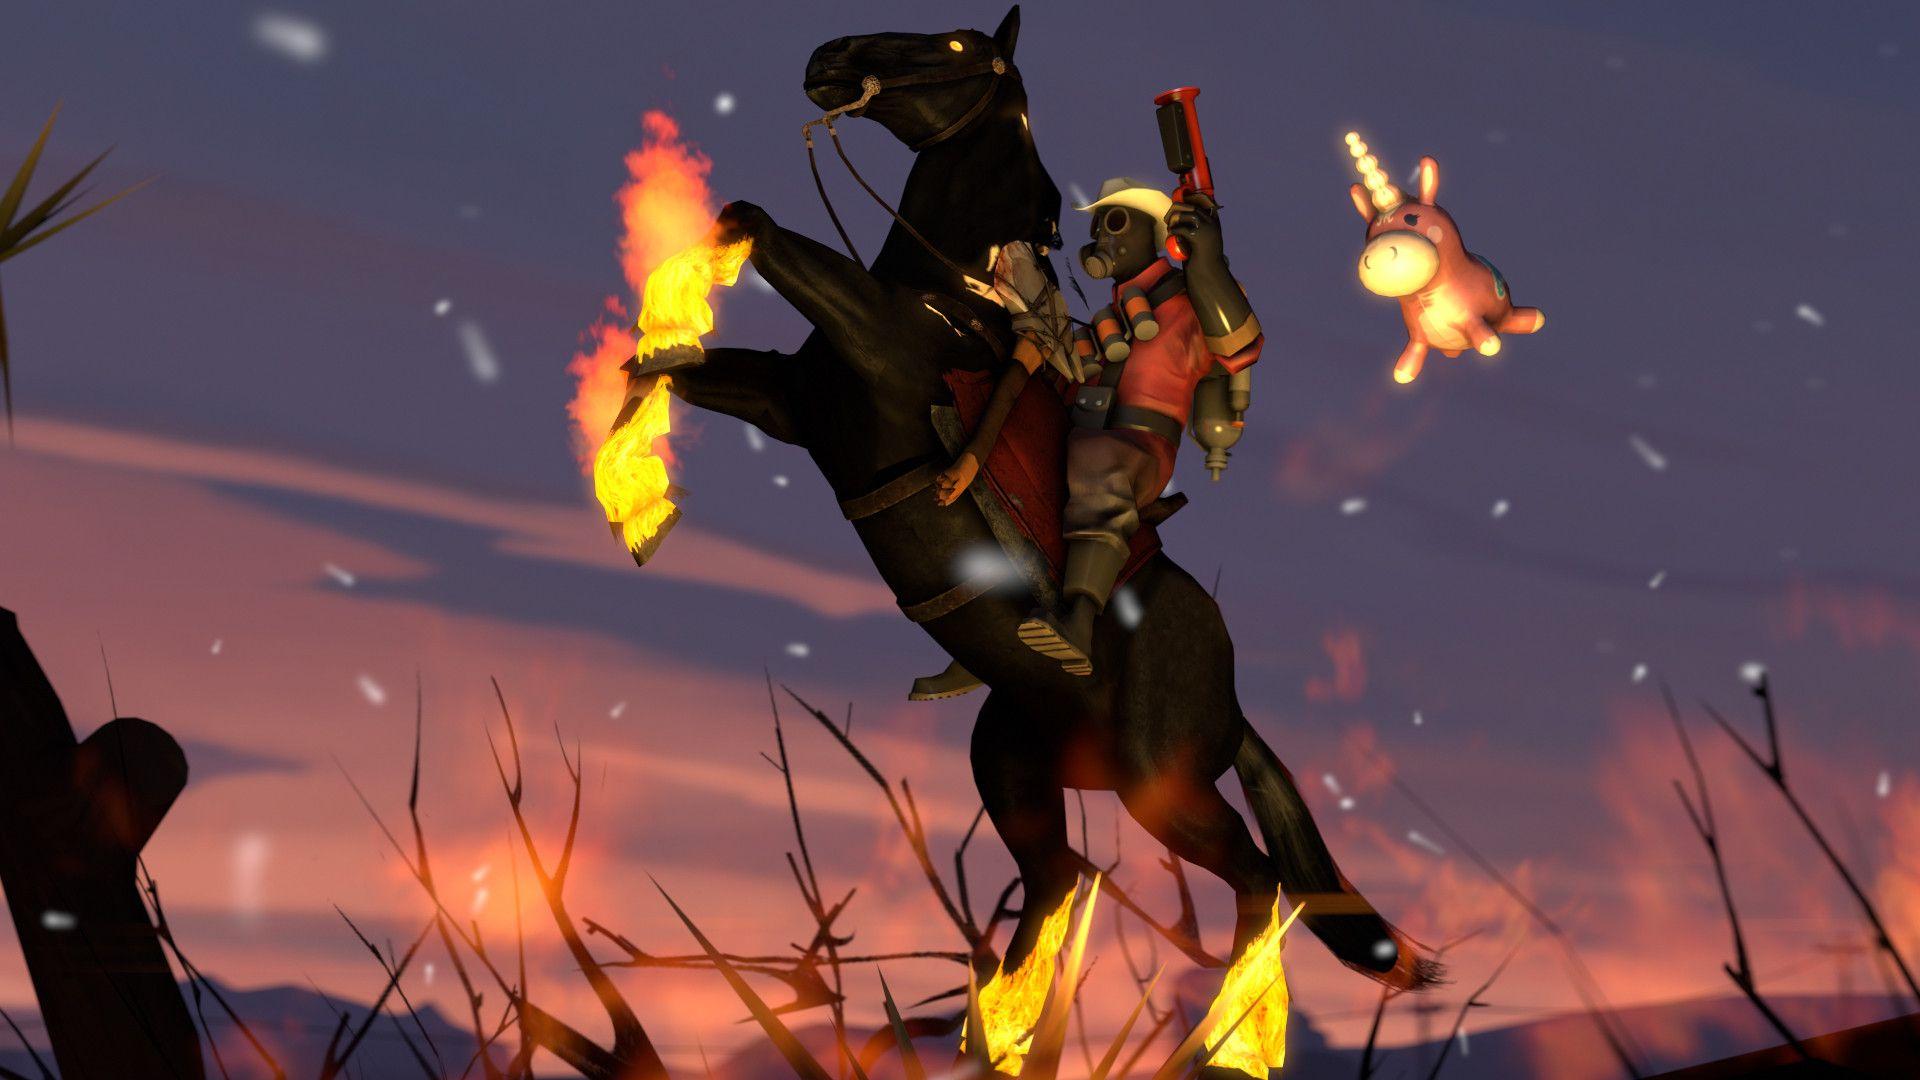 Awesome and Cute Pyro from Team Fortress 2 Image and Wallpaper